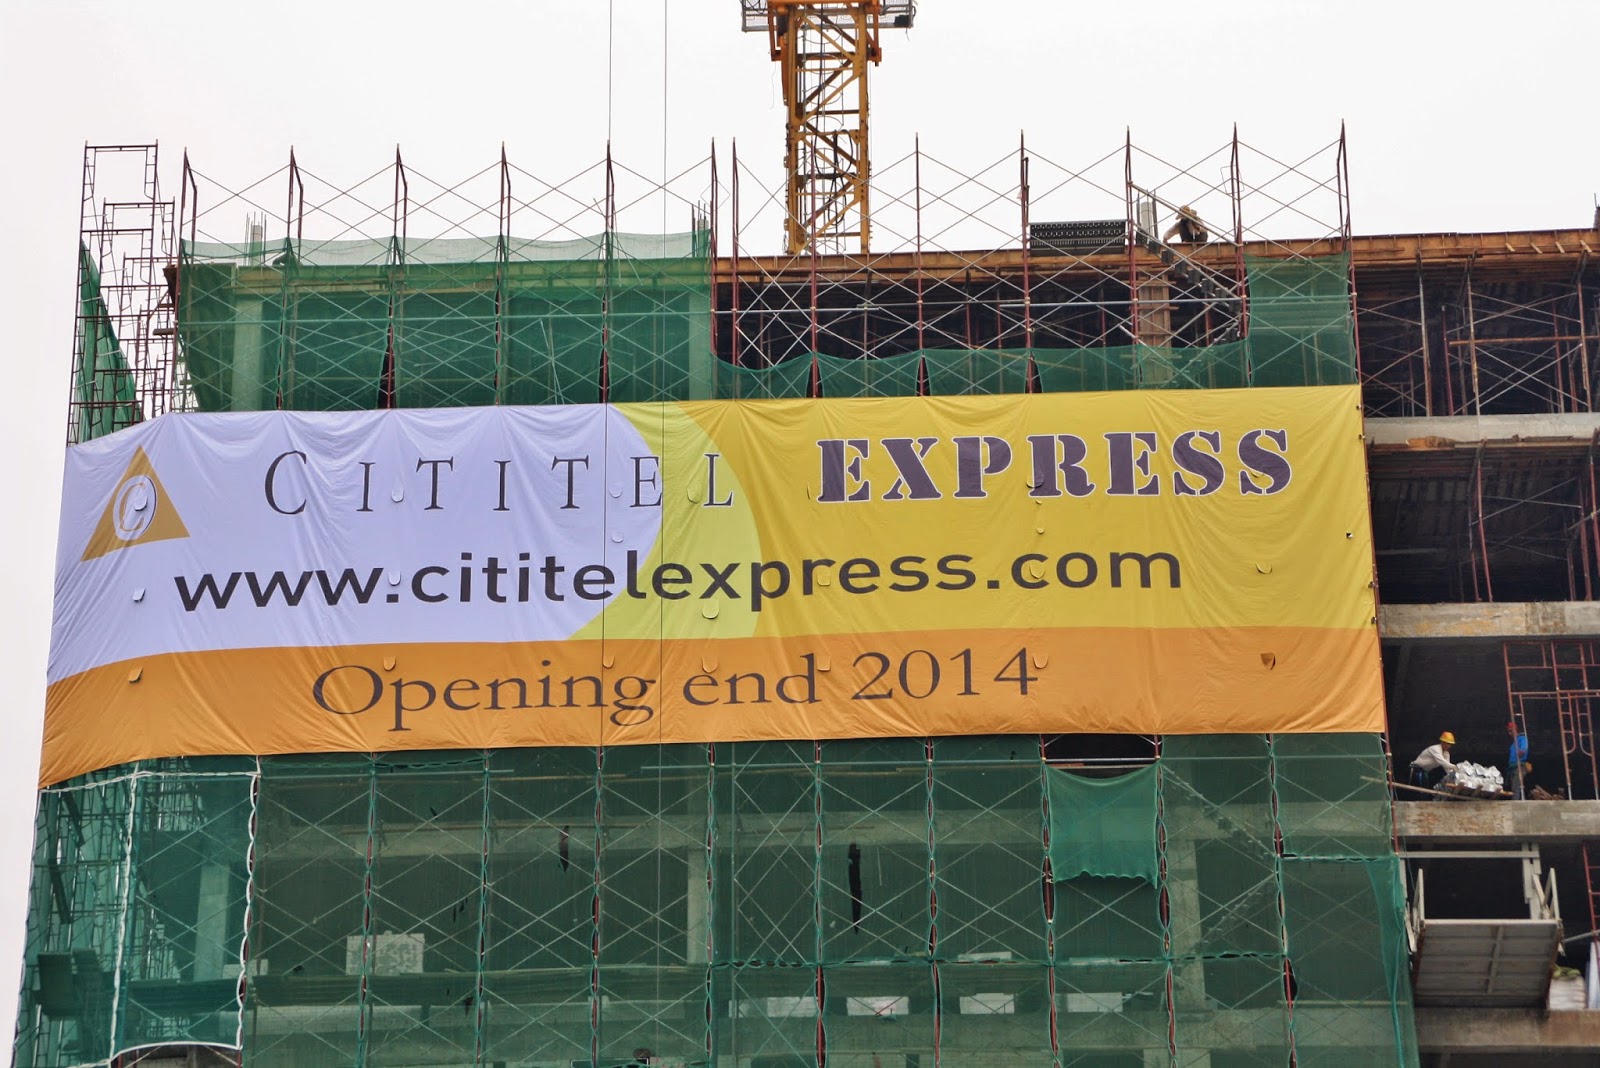 Images of Ipoh: Cititel Express is in Express Mode